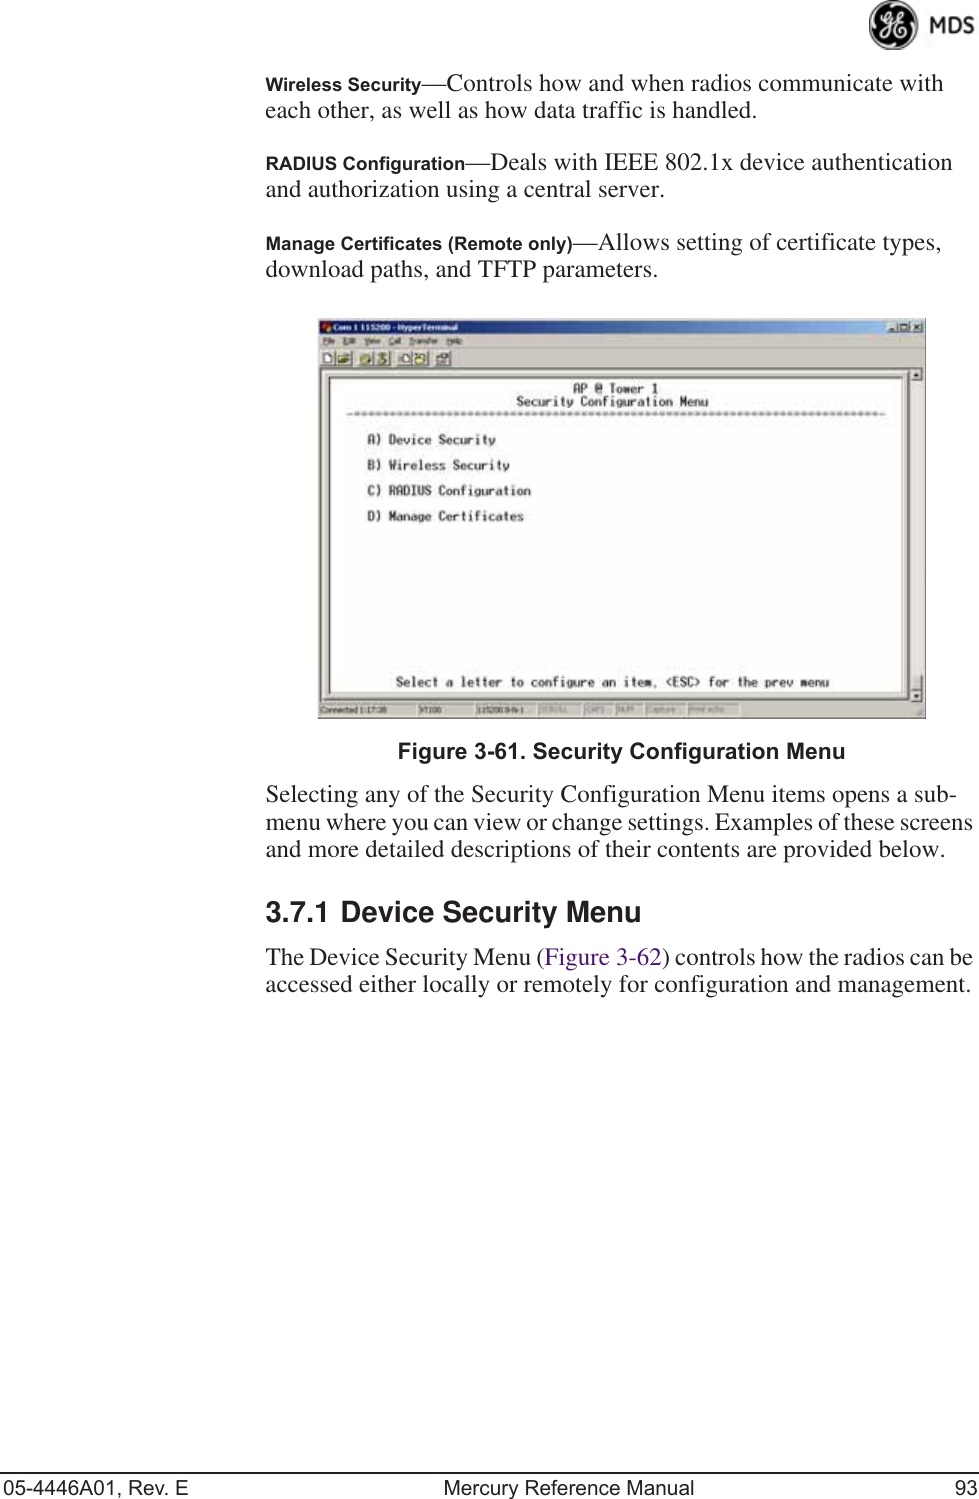 05-4446A01, Rev. E Mercury Reference Manual 93Wireless Security—Controls how and when radios communicate with each other, as well as how data traffic is handled.RADIUS Configuration—Deals with IEEE 802.1x device authentication and authorization using a central server.Manage Certificates (Remote only)—Allows setting of certificate types, download paths, and TFTP parameters.Invisible place holderFigure 3-61. Security Configuration MenuSelecting any of the Security Configuration Menu items opens a sub-menu where you can view or change settings. Examples of these screens and more detailed descriptions of their contents are provided below.3.7.1 Device Security MenuThe Device Security Menu (Figure 3-62) controls how the radios can be accessed either locally or remotely for configuration and management. 